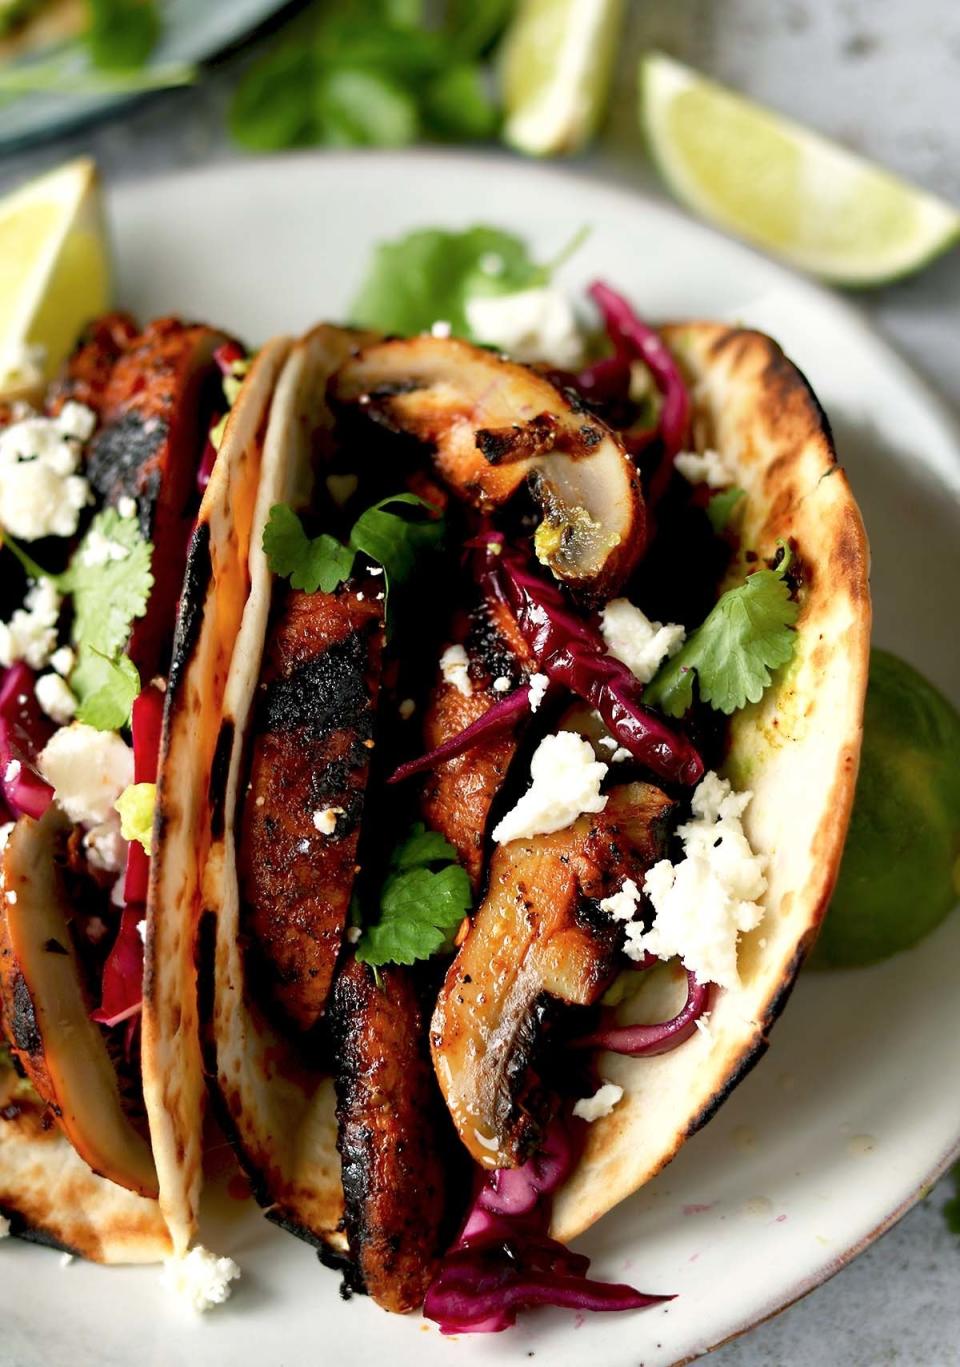 Two tacos filled with sliced mushrooms, cabbage, herbs, and cotija cheese